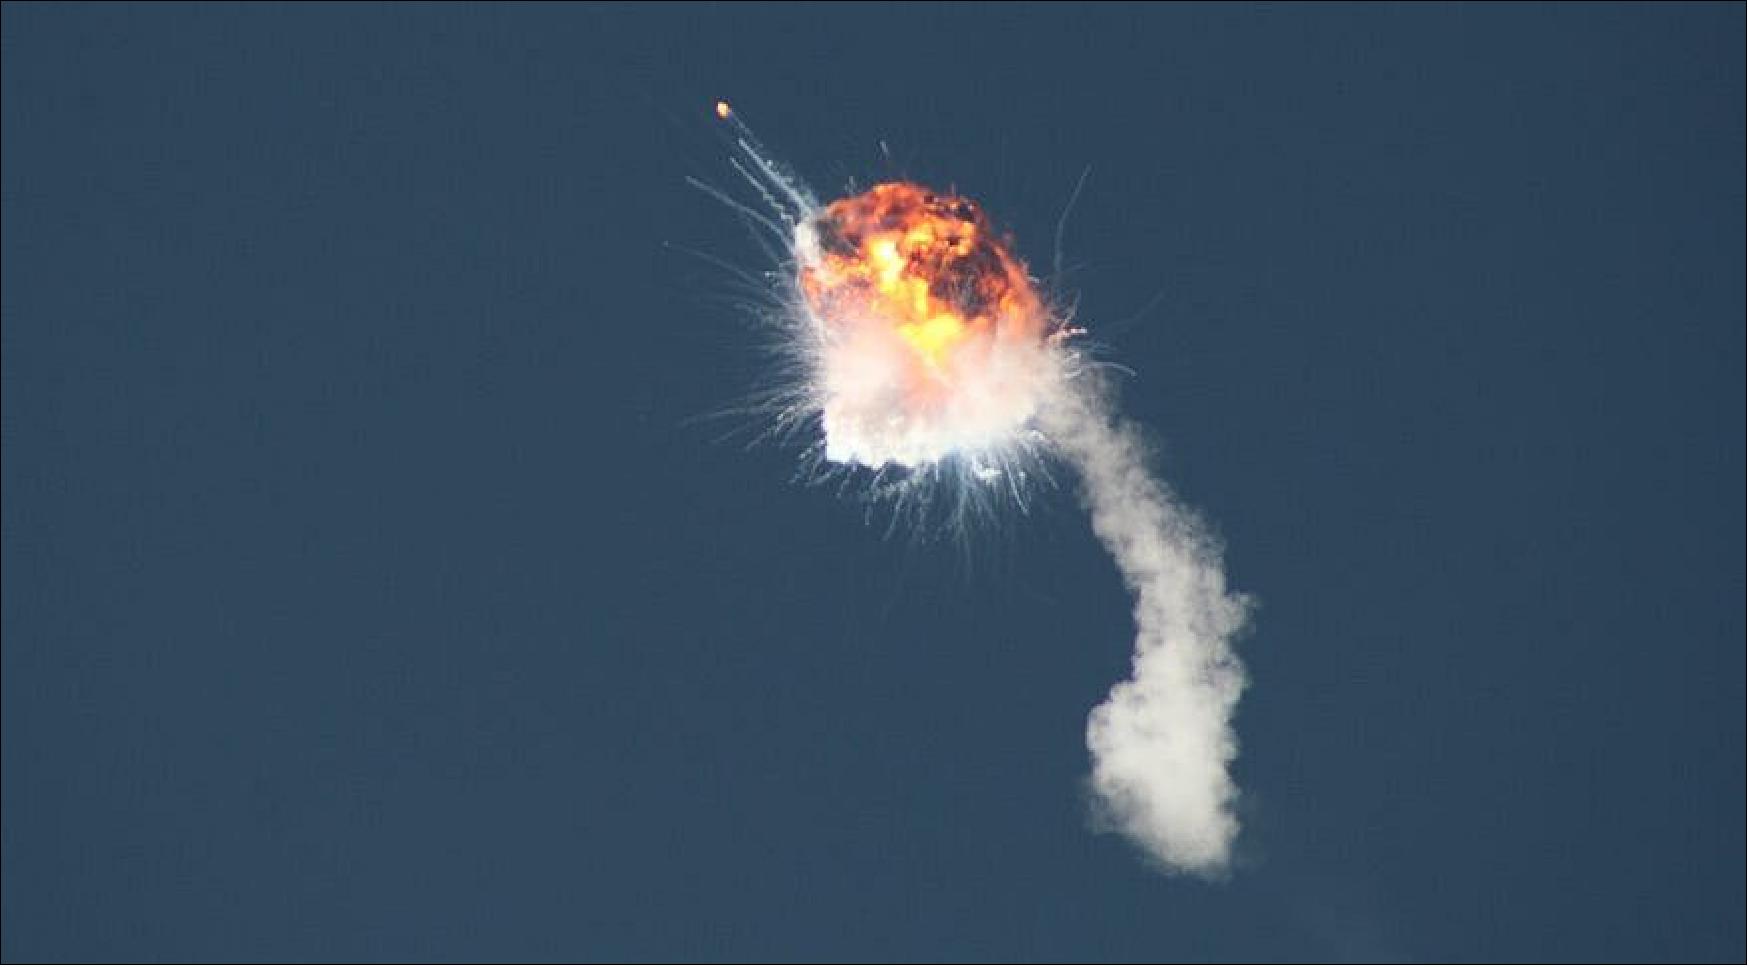 Figure 7: Firefly Aerospace's Alpha rocket explodes about two minutes after liftoff from Vandenberg Space Force Base in California (image credit: SpaceNews/Jeff Foust)